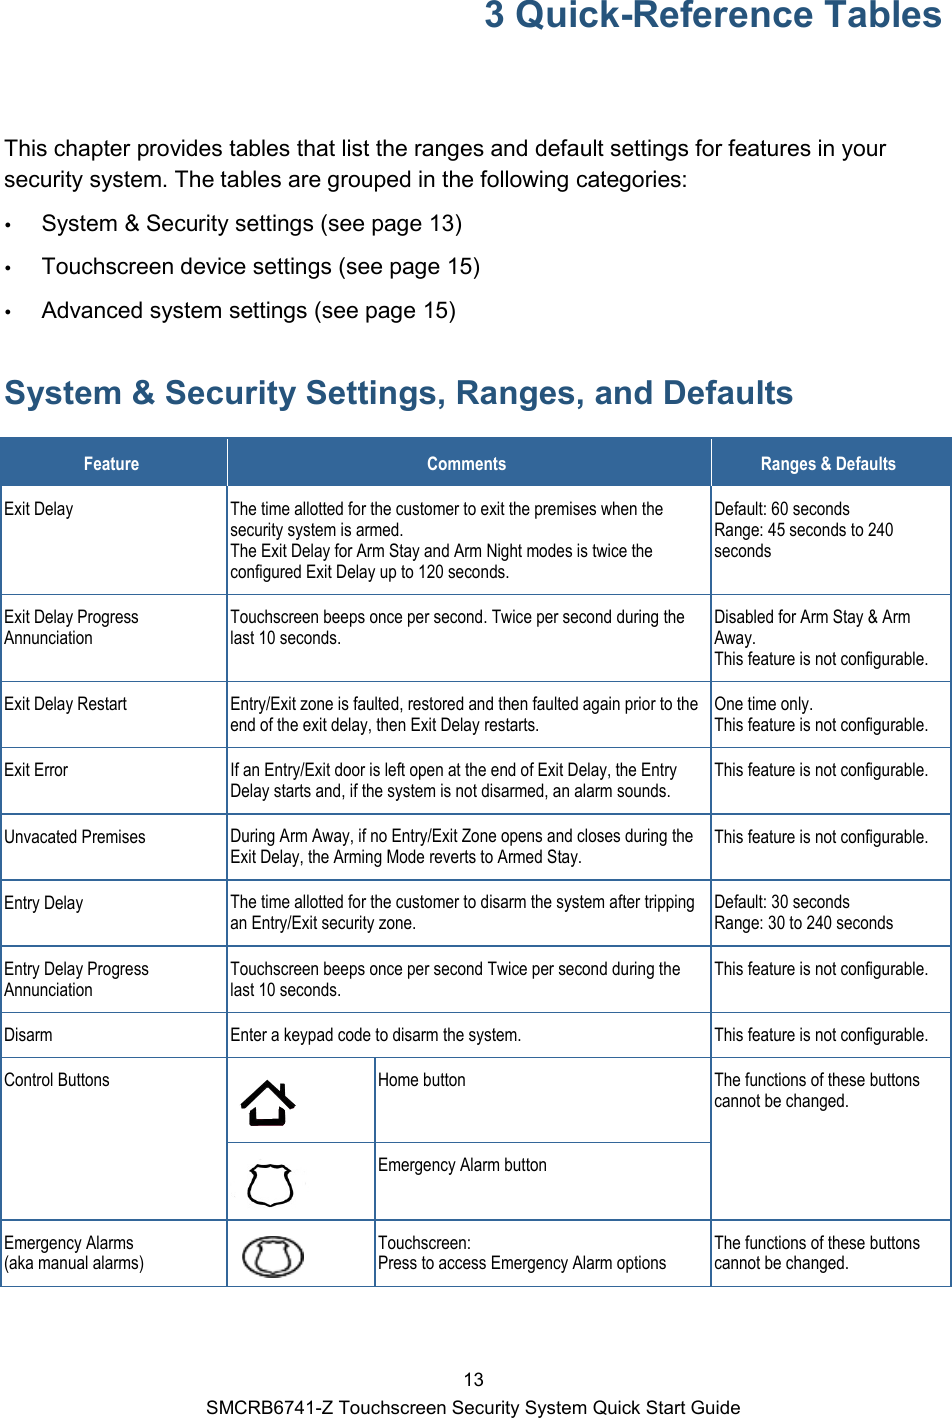  13 SMCRB6741-Z Touchscreen Security System Quick Start Guide 3 Quick-Reference Tables  This chapter provides tables that list the ranges and default settings for features in your security system. The tables are grouped in the following categories:   System &amp; Security settings (see page 13)  Touchscreen device settings (see page 15)  Advanced system settings (see page 15) System &amp; Security Settings, Ranges, and Defaults Feature Comments Ranges &amp; Defaults Exit Delay The time allotted for the customer to exit the premises when the security system is armed. The Exit Delay for Arm Stay and Arm Night modes is twice the configured Exit Delay up to 120 seconds. Default: 60 seconds Range: 45 seconds to 240 seconds Exit Delay Progress Annunciation Touchscreen beeps once per second. Twice per second during the last 10 seconds. Disabled for Arm Stay &amp; Arm Away.  This feature is not configurable. Exit Delay Restart Entry/Exit zone is faulted, restored and then faulted again prior to the end of the exit delay, then Exit Delay restarts.  One time only.  This feature is not configurable. Exit Error If an Entry/Exit door is left open at the end of Exit Delay, the Entry Delay starts and, if the system is not disarmed, an alarm sounds.  This feature is not configurable. Unvacated Premises During Arm Away, if no Entry/Exit Zone opens and closes during the Exit Delay, the Arming Mode reverts to Armed Stay.  This feature is not configurable. Entry Delay The time allotted for the customer to disarm the system after tripping an Entry/Exit security zone.  Default: 30 seconds Range: 30 to 240 seconds Entry Delay Progress Annunciation Touchscreen beeps once per second Twice per second during the last 10 seconds. This feature is not configurable. Disarm Enter a keypad code to disarm the system. This feature is not configurable. Control Buttons  Home button The functions of these buttons cannot be changed.  Emergency Alarm button Emergency Alarms  (aka manual alarms)     Touchscreen:  Press to access Emergency Alarm options  The functions of these buttons cannot be changed. 